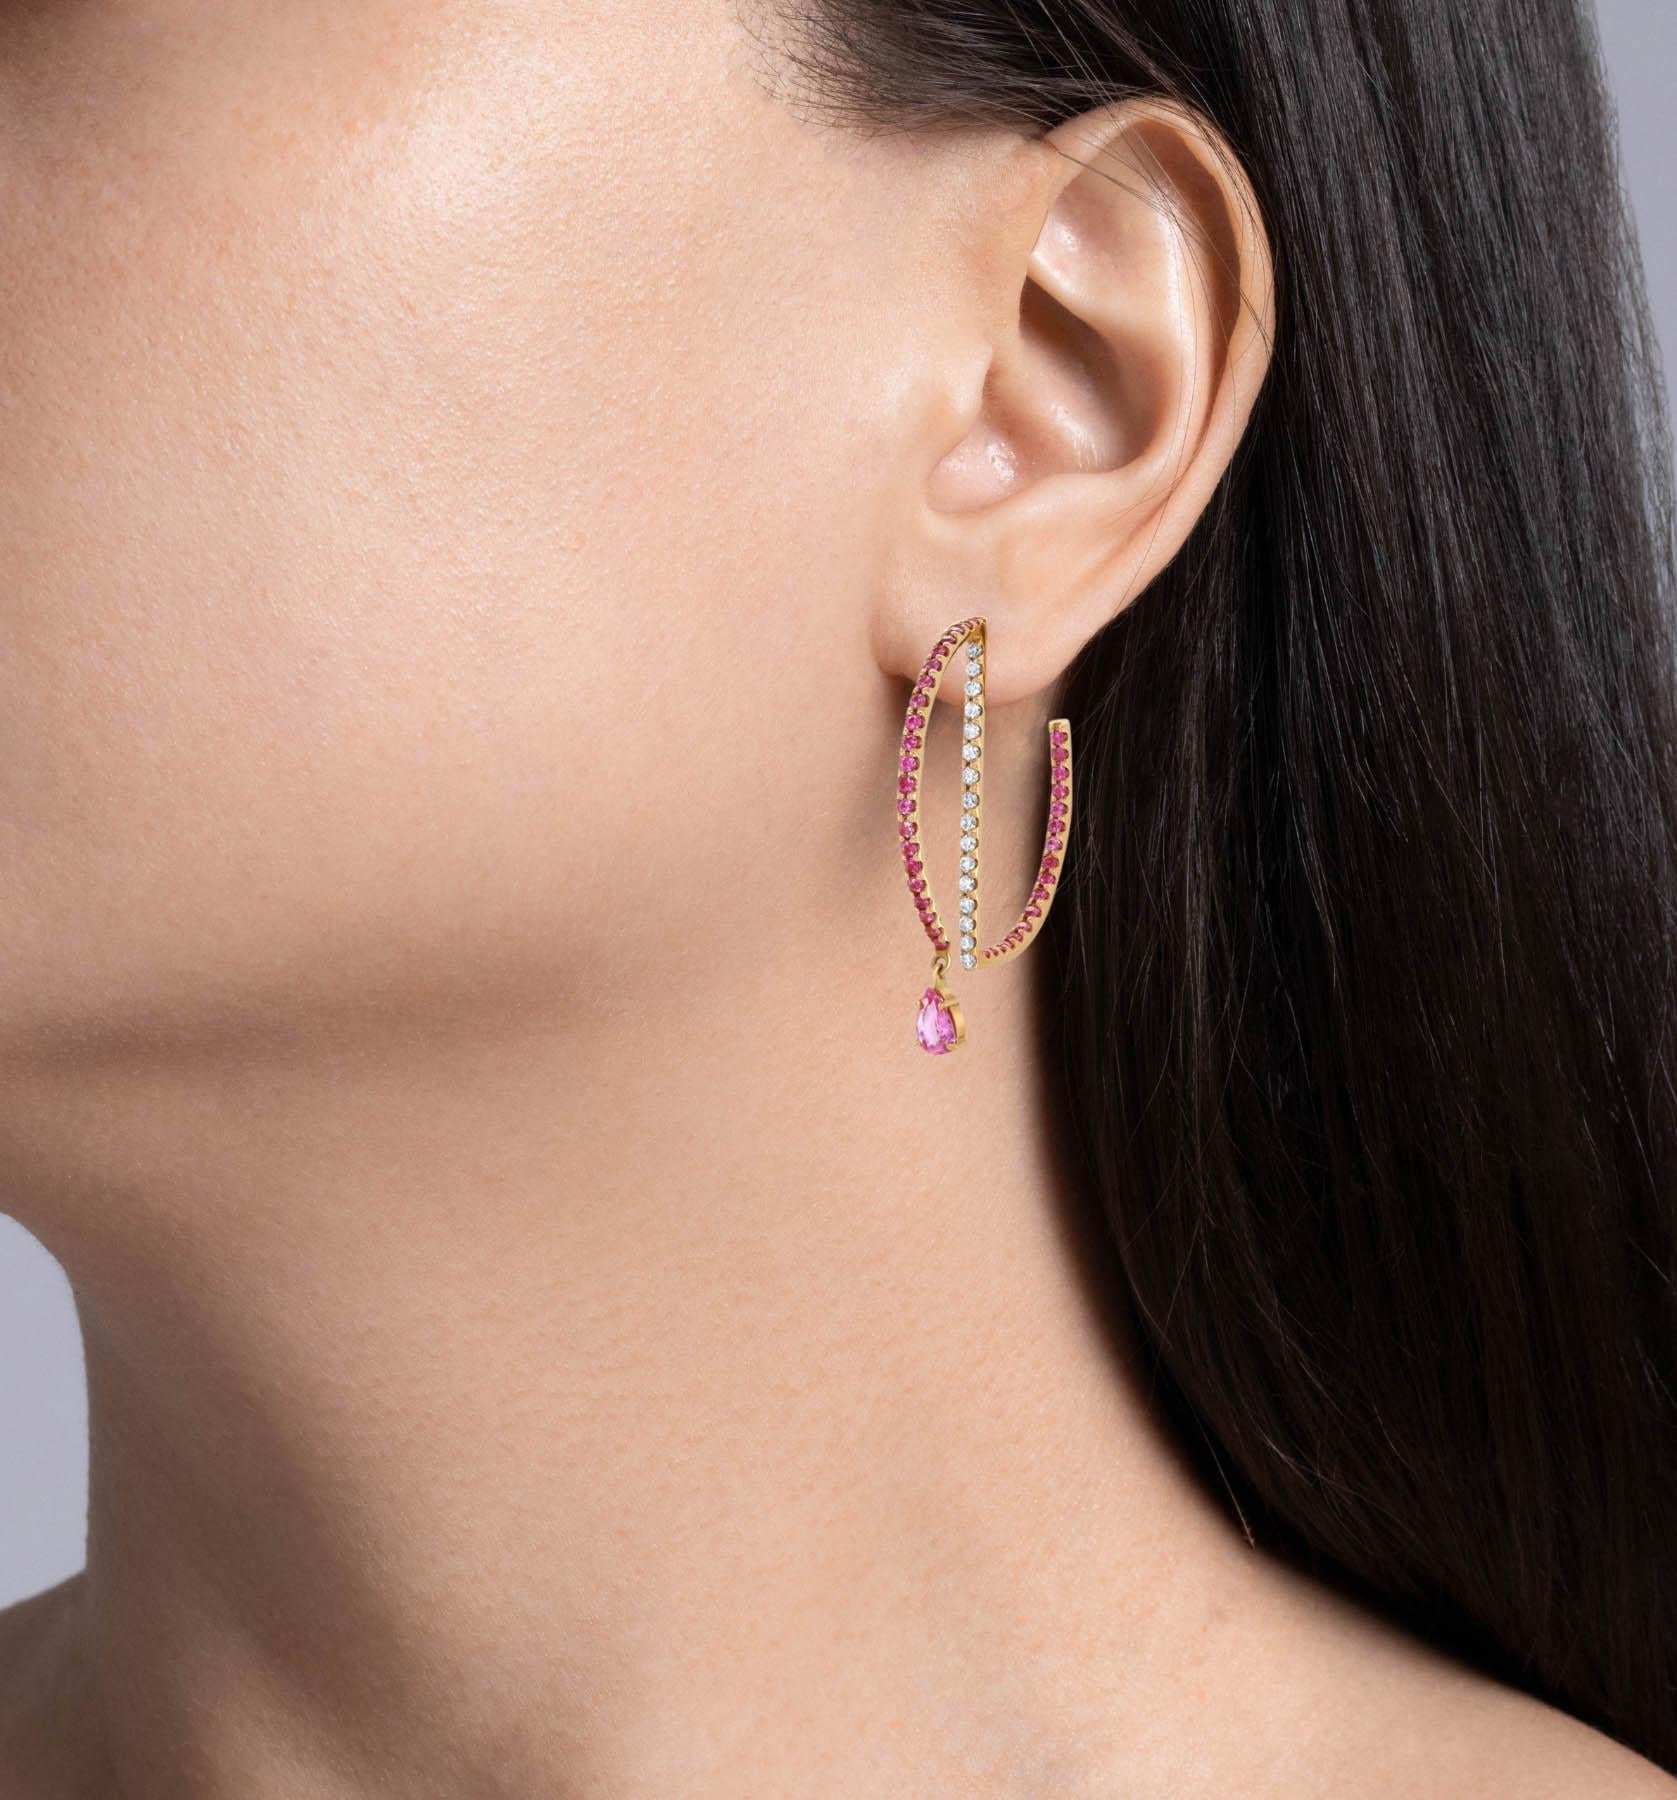 Kavant & Sharart Pink Sapphire and Diamond Geo Art Hoop earrings in 18k Rose gold 
Set with Pear and Round shaped Pink Sapphires; estimated total weight is 1.17 carats. 
There are also Round Brilliant diamonds; estimated weight is 0.52ctw.
Each hoop